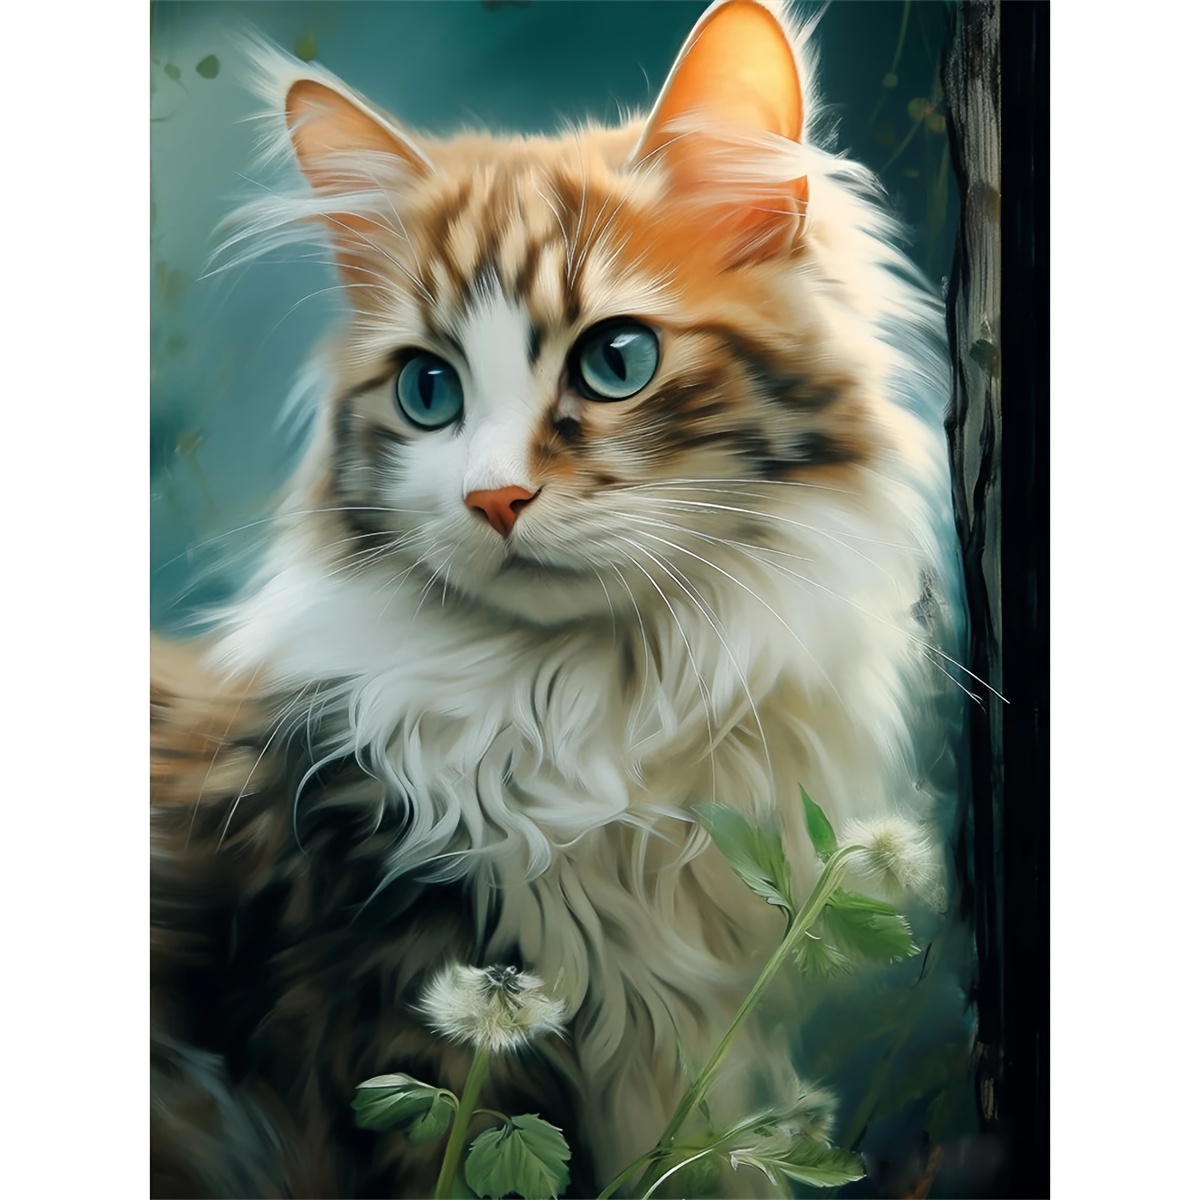 

1pc Large Size 40*50cm/15.7*19.7in Frameless Christmas Holiday Surprise Gift Diy Handmade 5d Diamond Painting Animal Cat Full Diamond Painting Art Embroidery Diamond Painting Art Craft Wall Decoration